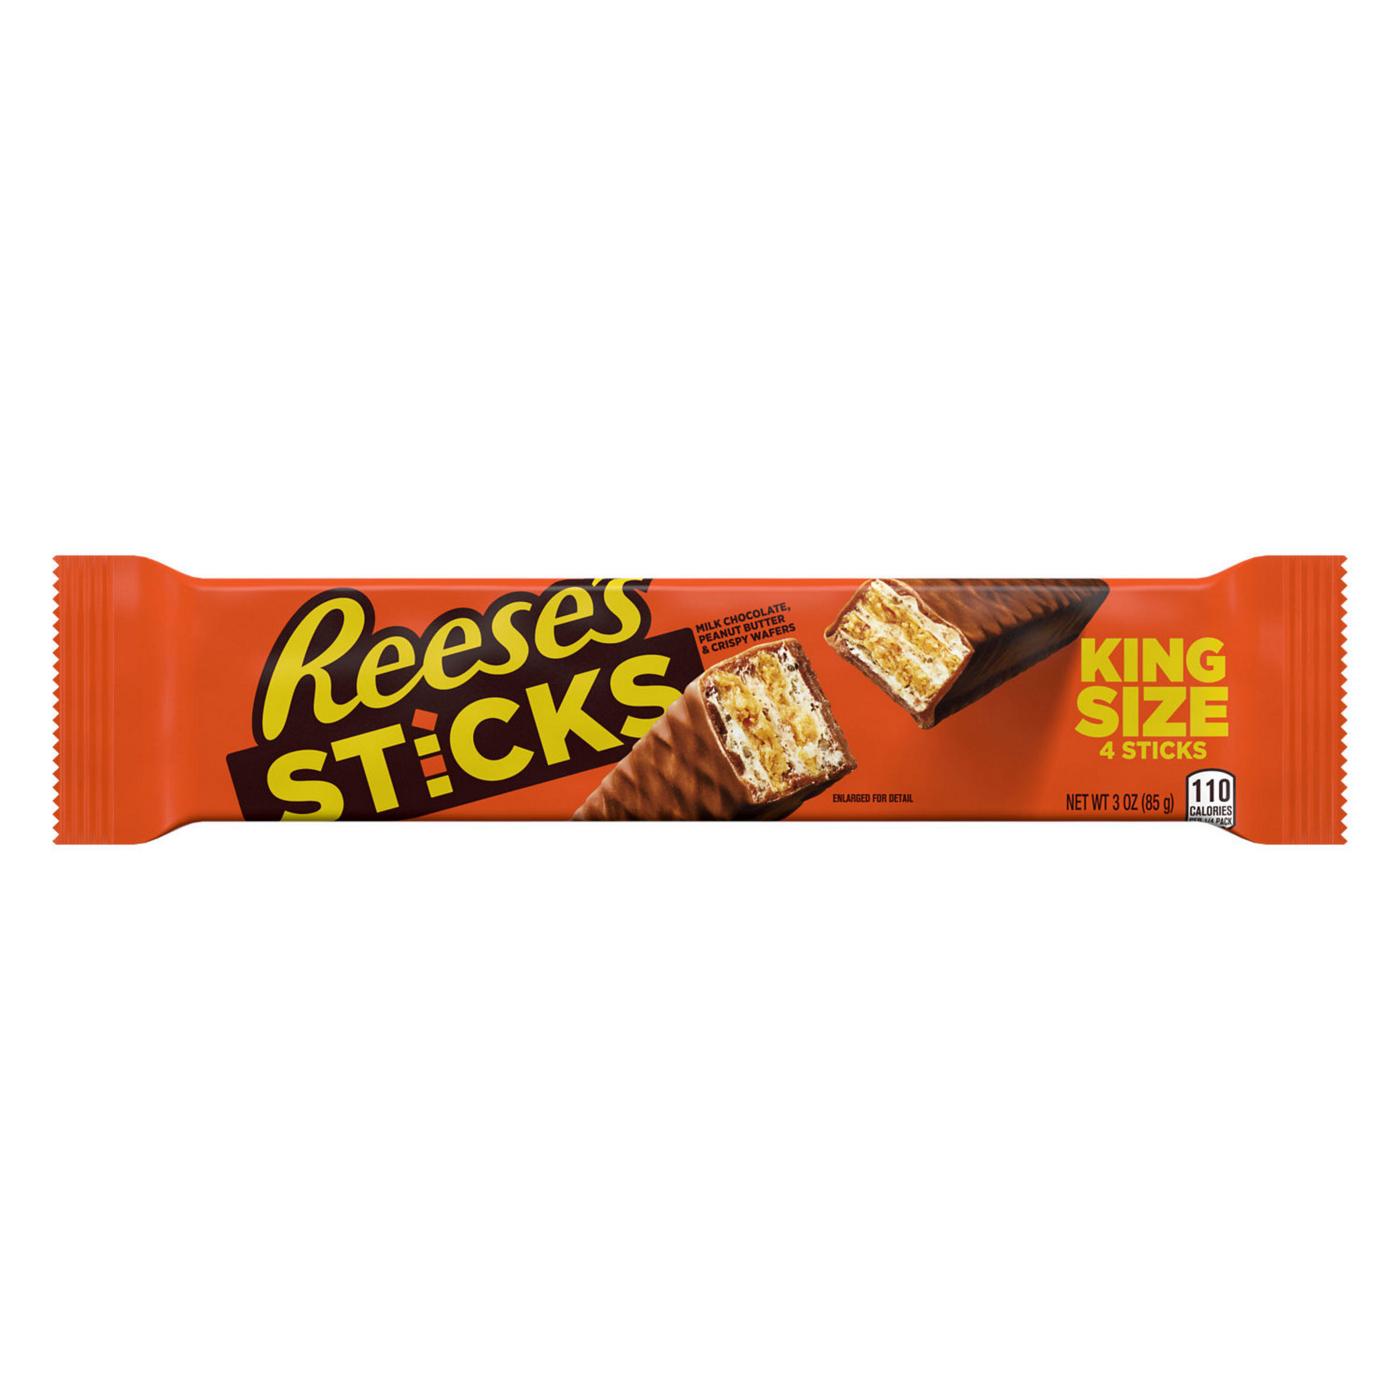 Reese's Sticks Milk Chocolate Peanut Butter Wafer Candy - King Size; image 1 of 7